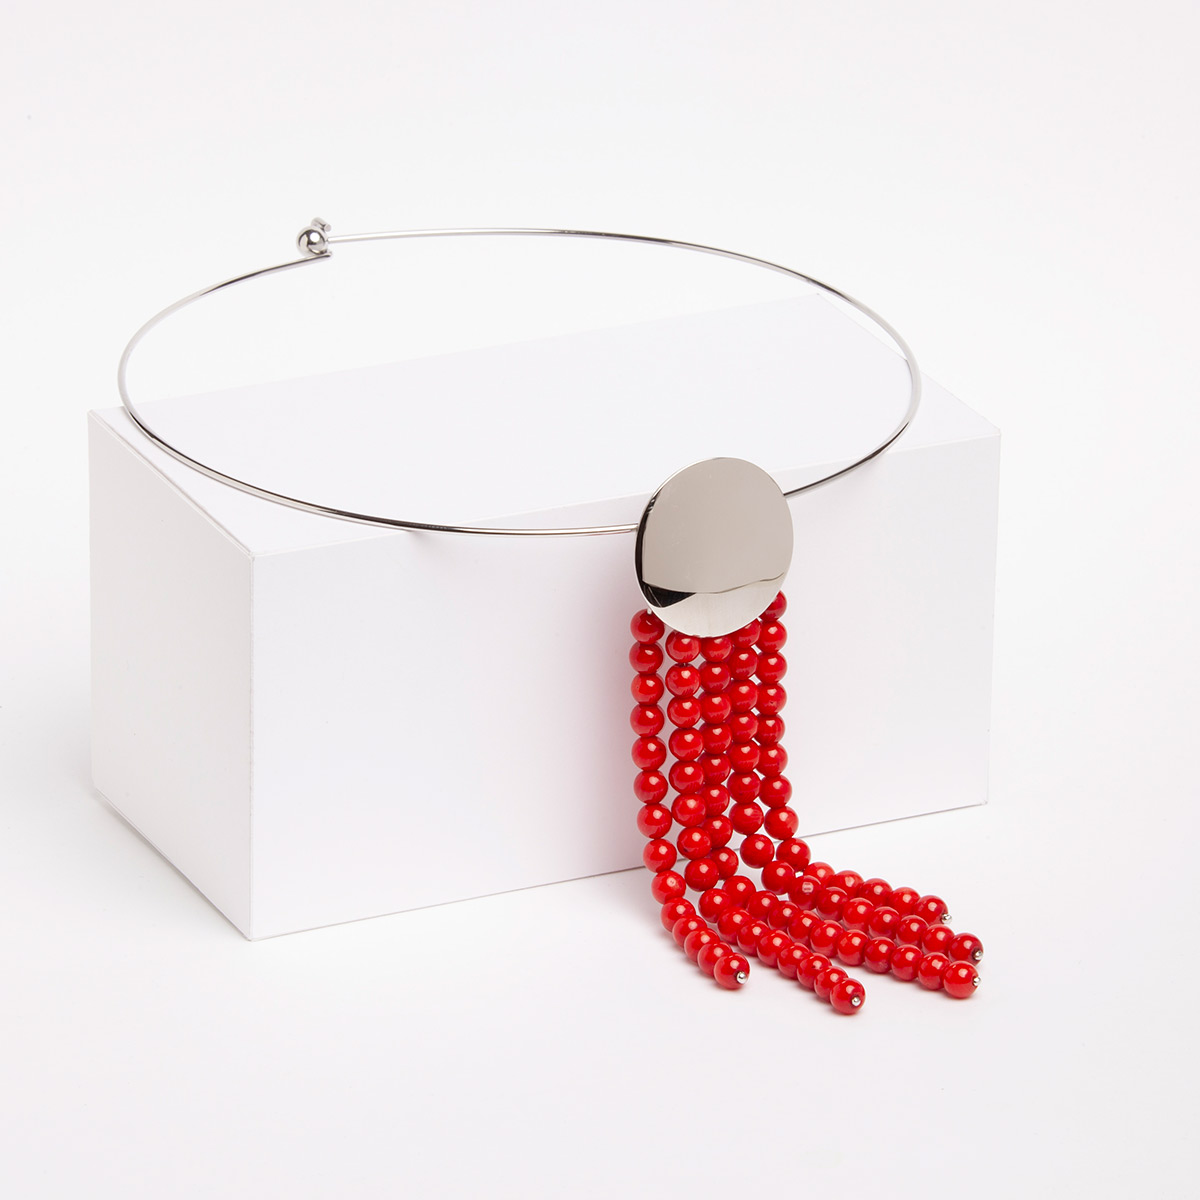 Handmade sterling silver and coral Tik necklace designed by Belen Bajo